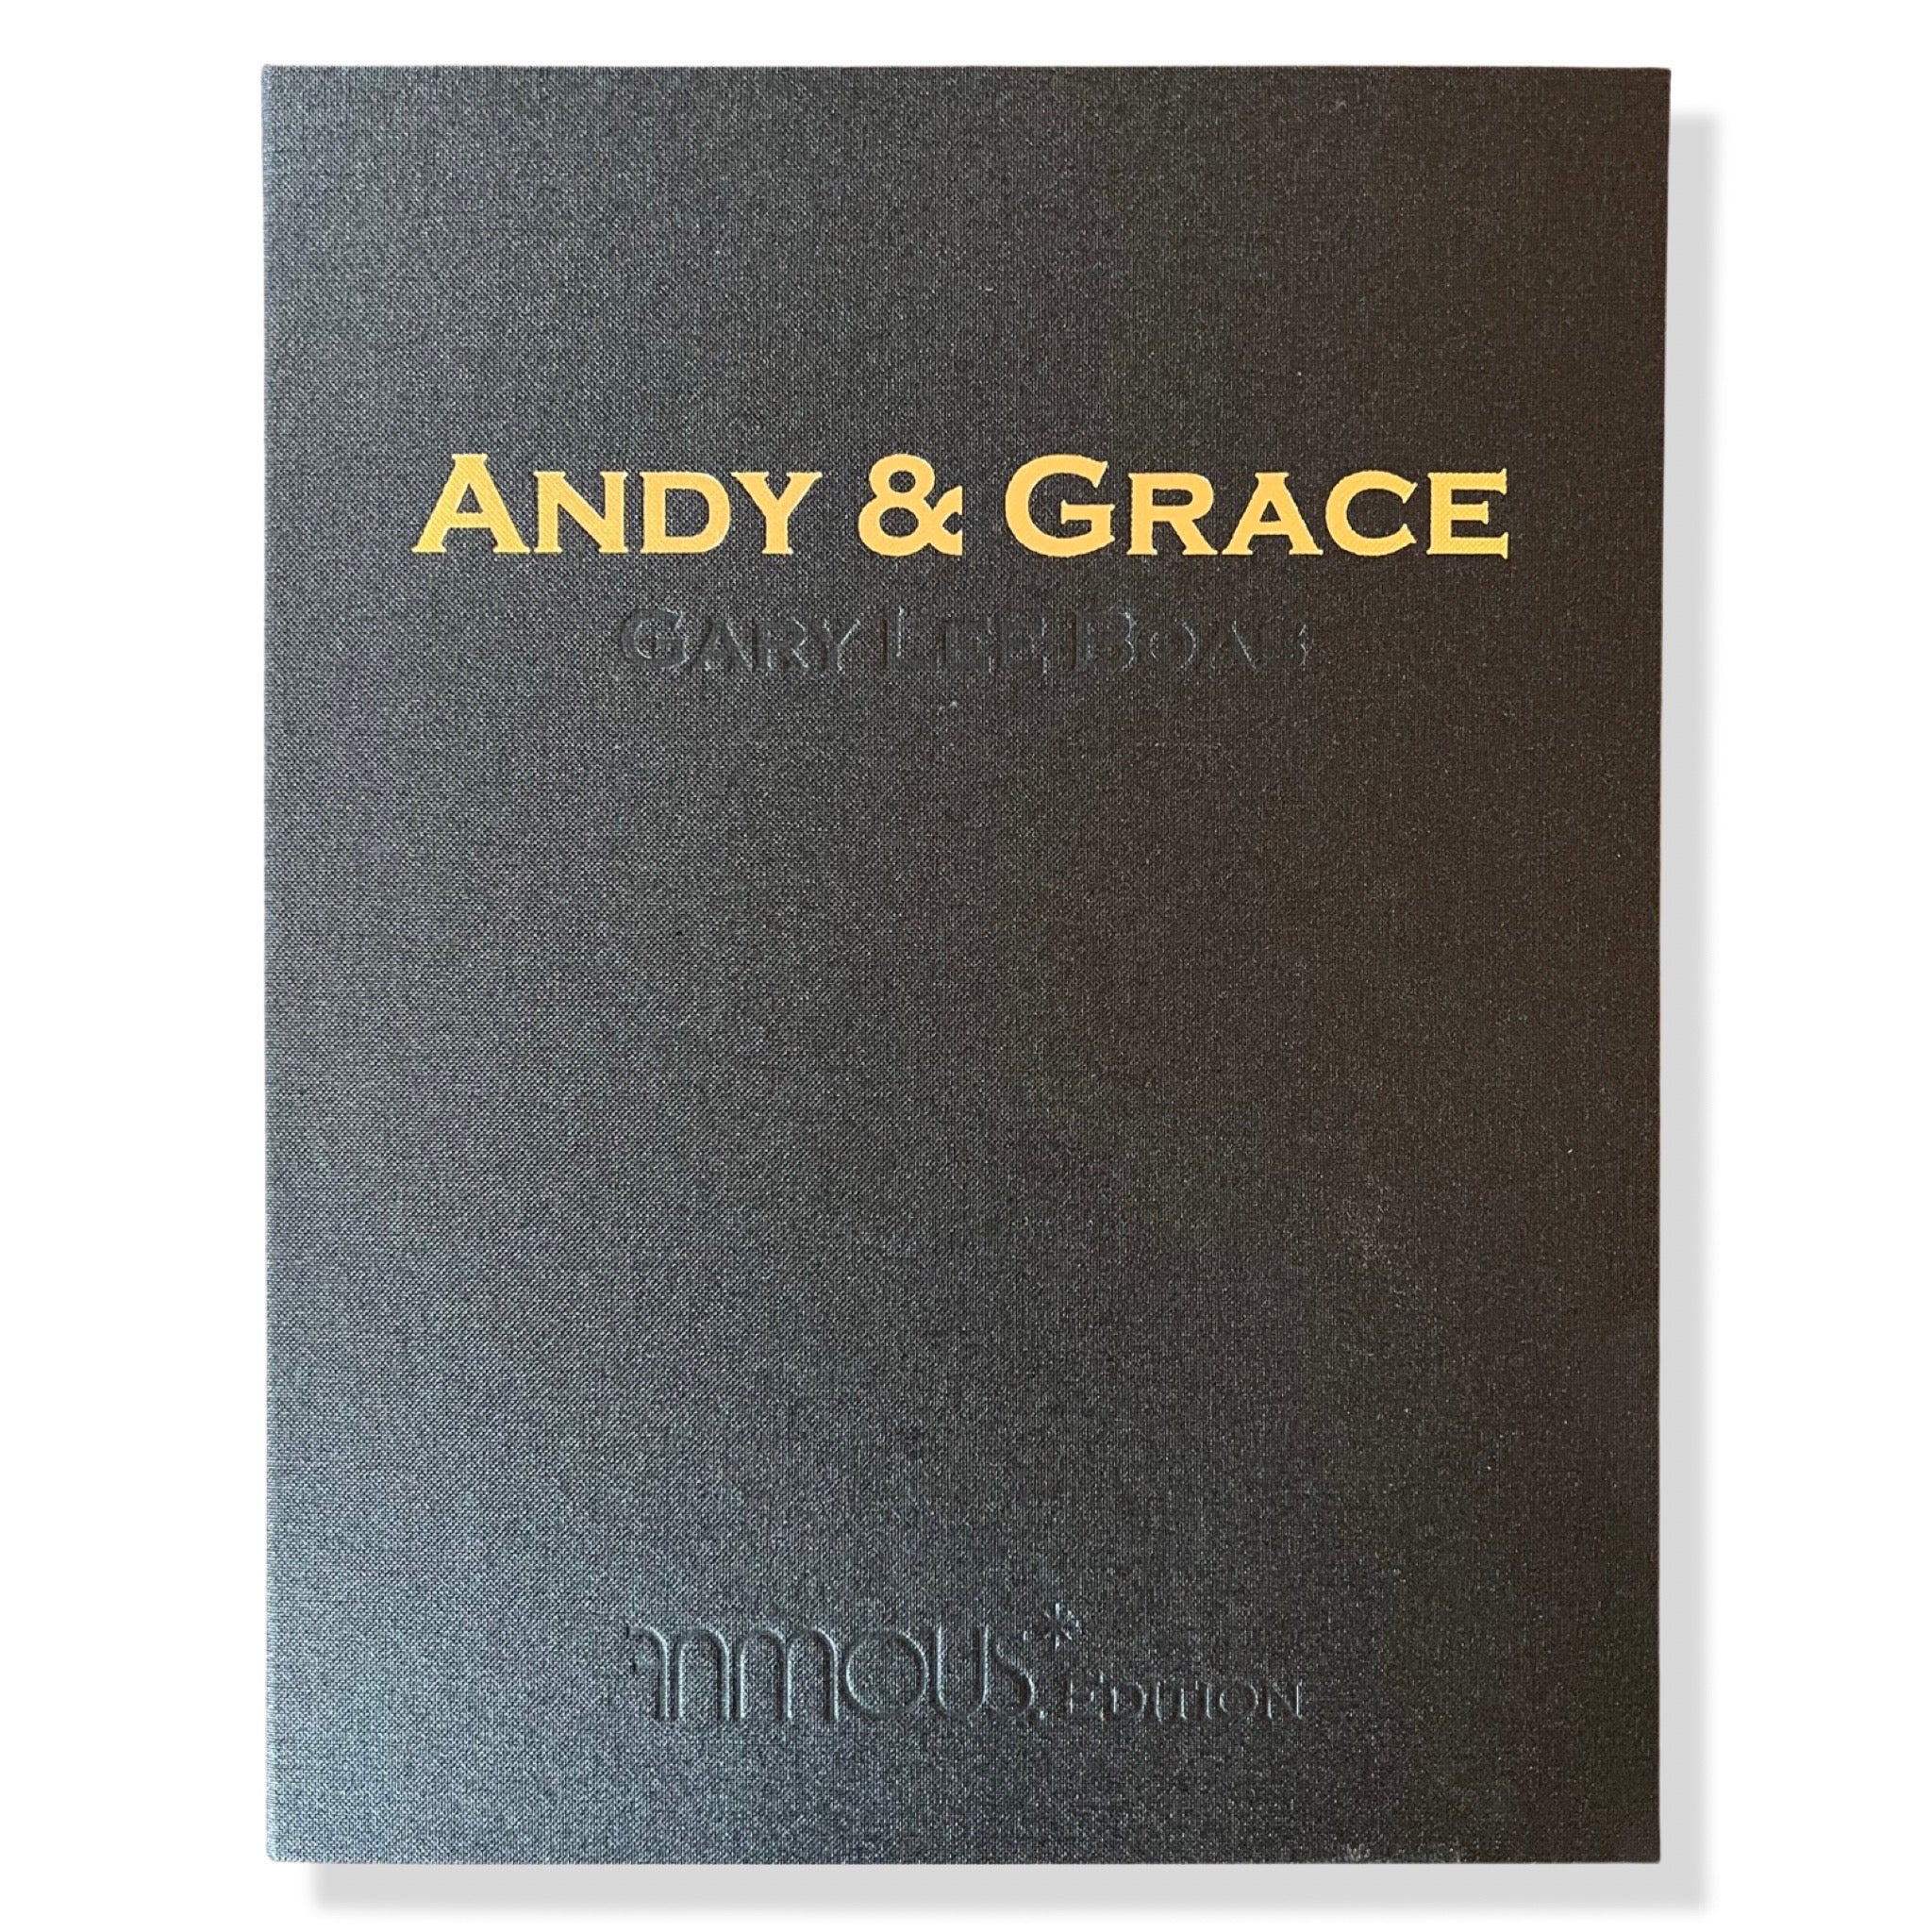 Gary Lee Boas - Andy & Grace (FAMOUS Edition)